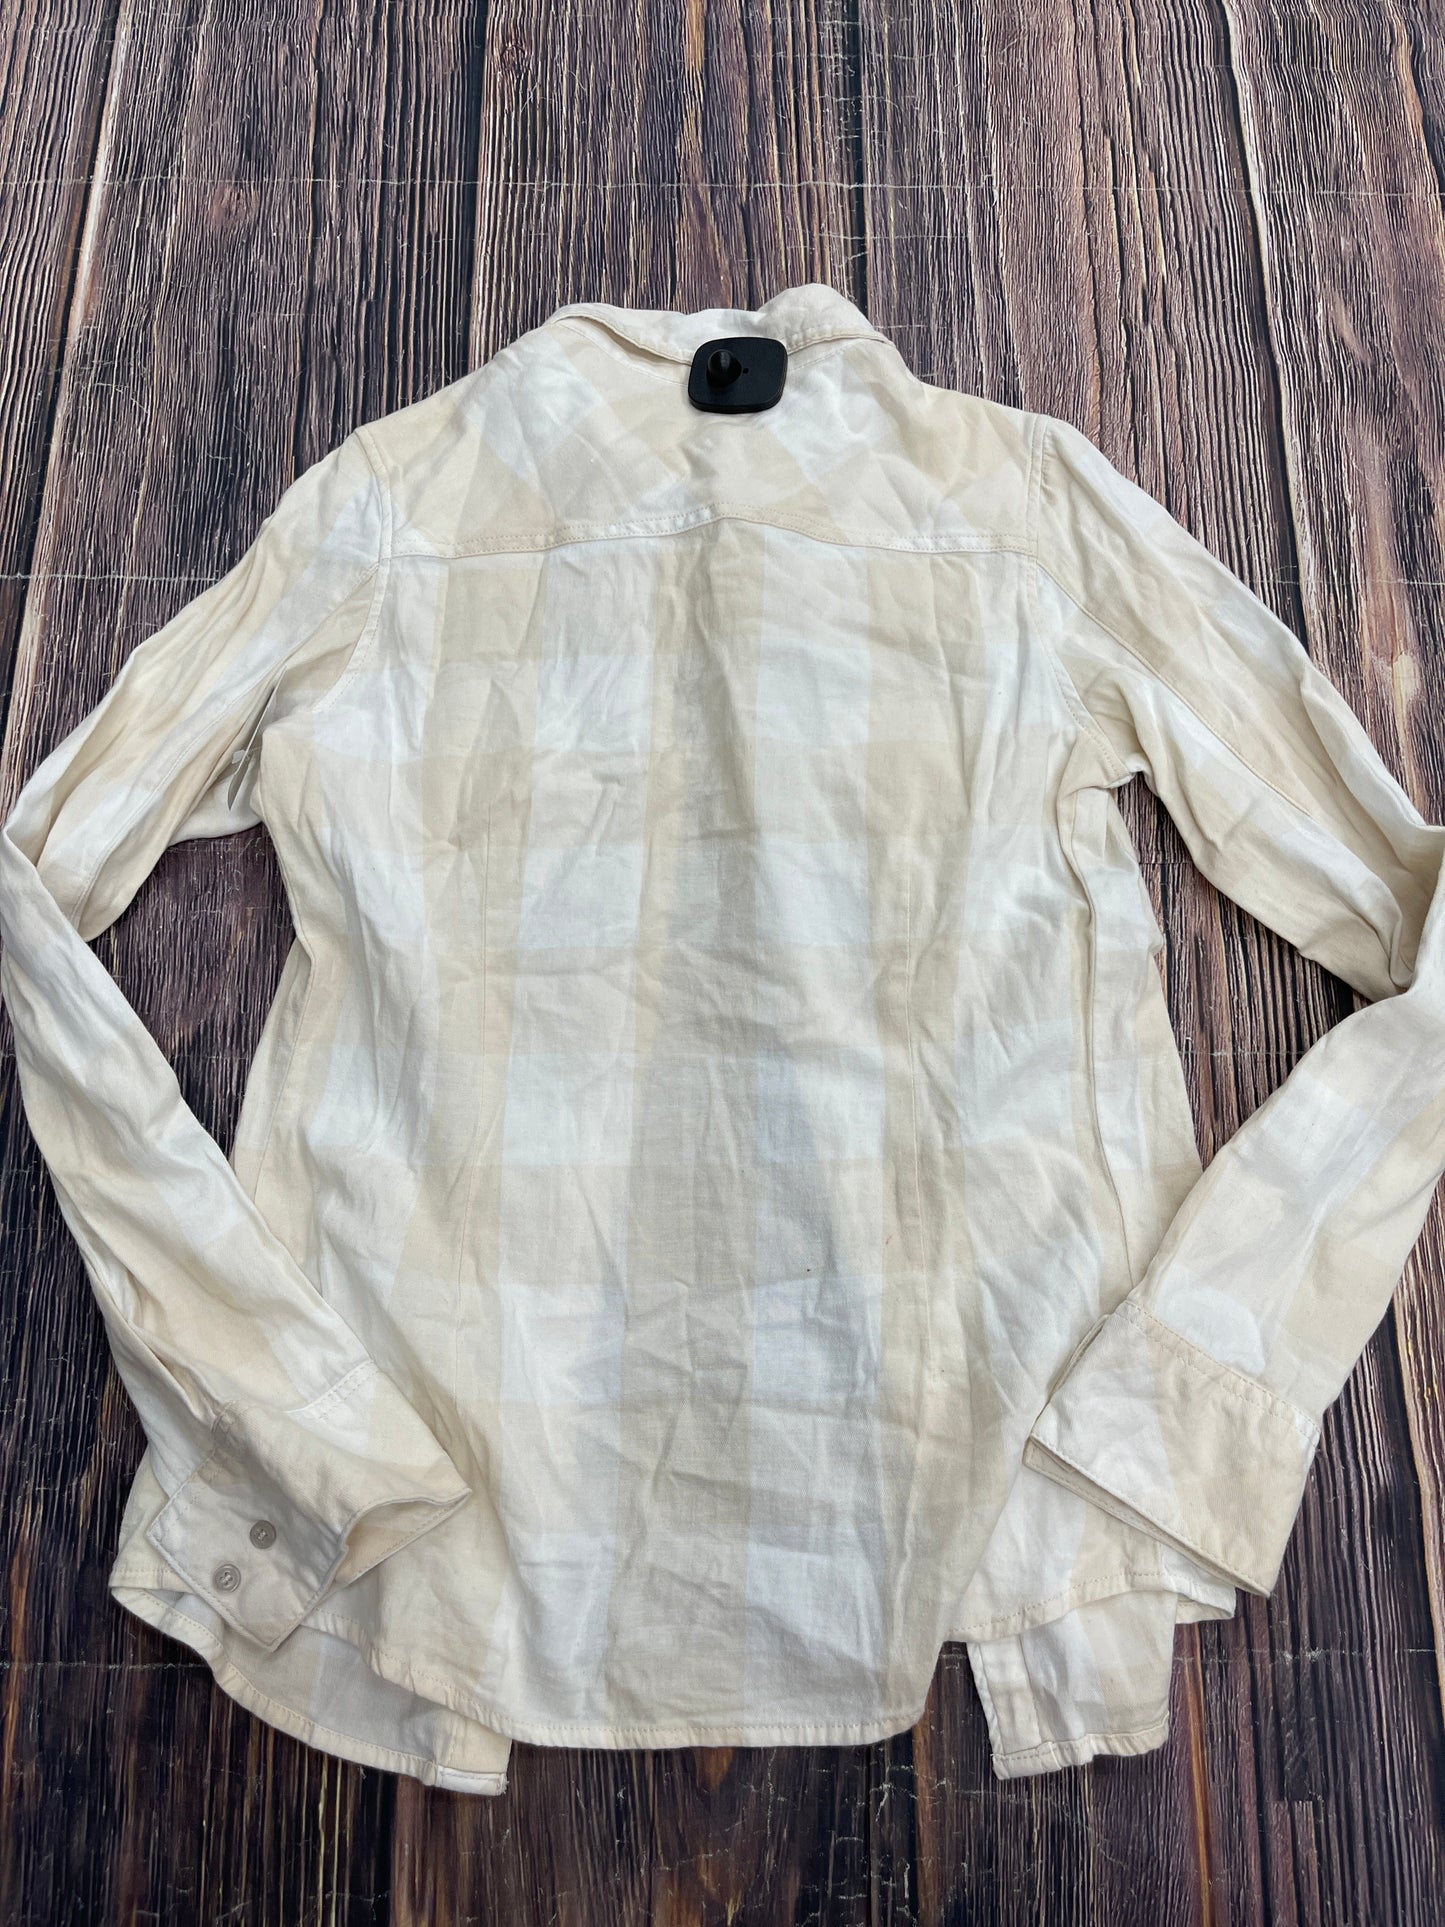 Tan Top Long Sleeve Thread And Supply, Size M